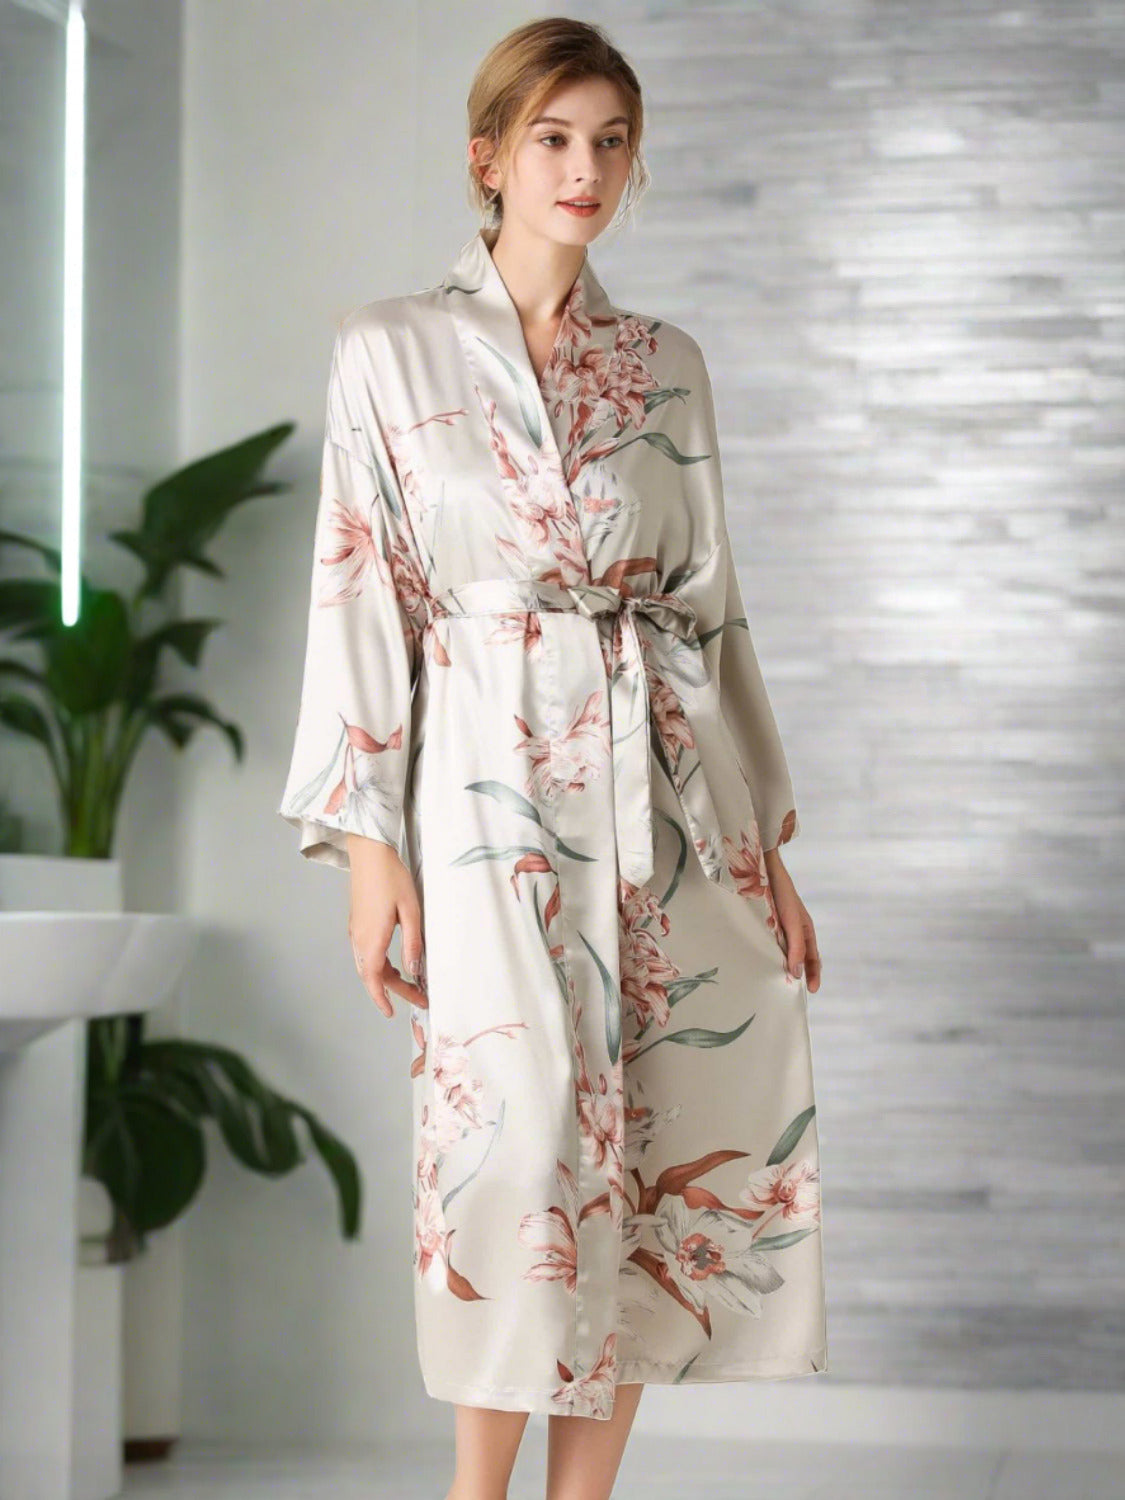 Model wearing light gray floral patterned robe